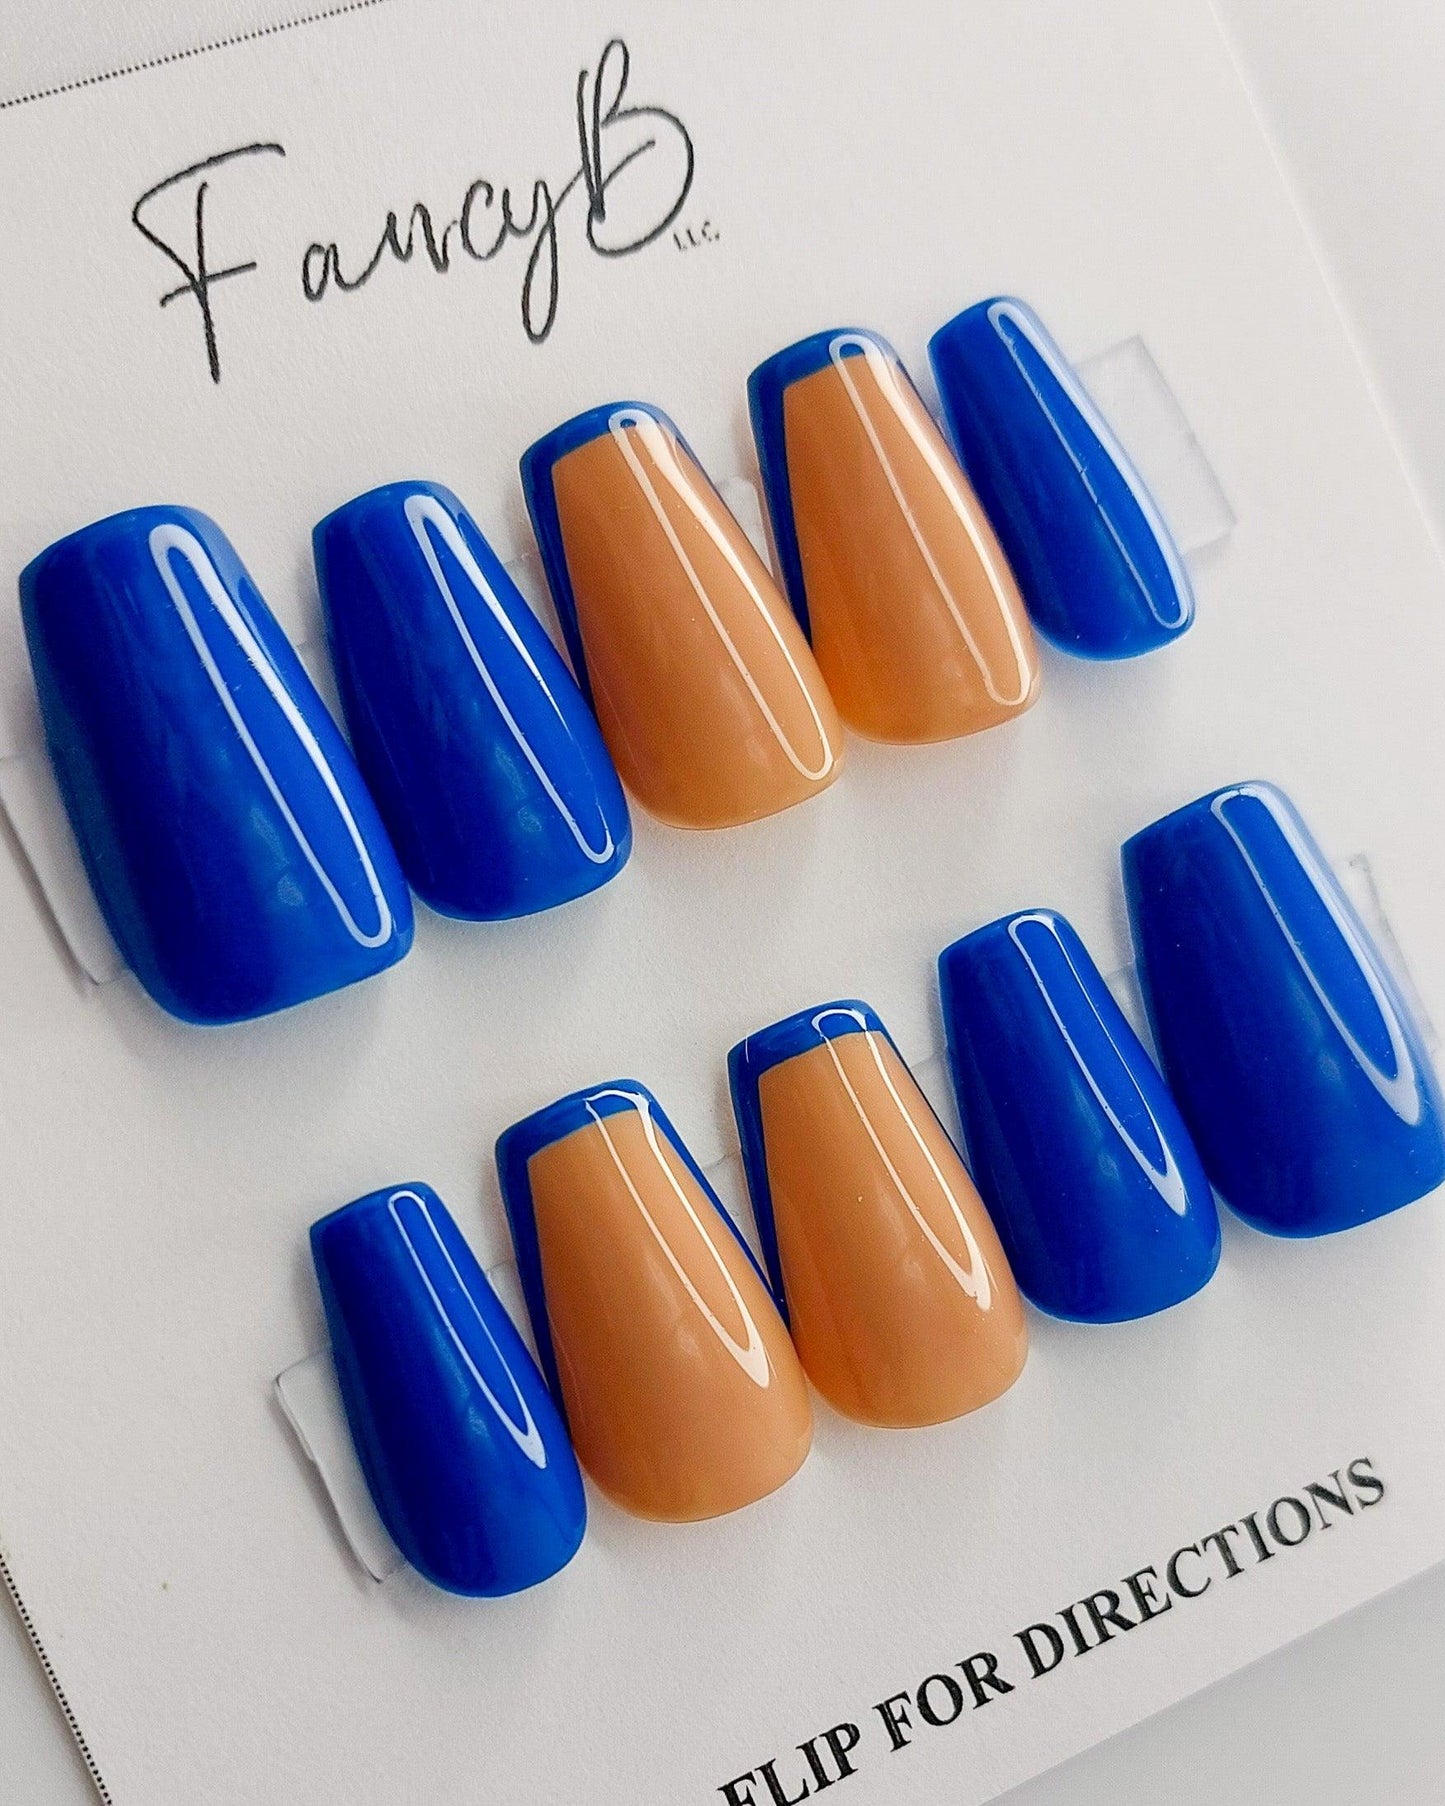 Skinny French | Thin French Tip Press on Nails - FancyB Press-on Nails